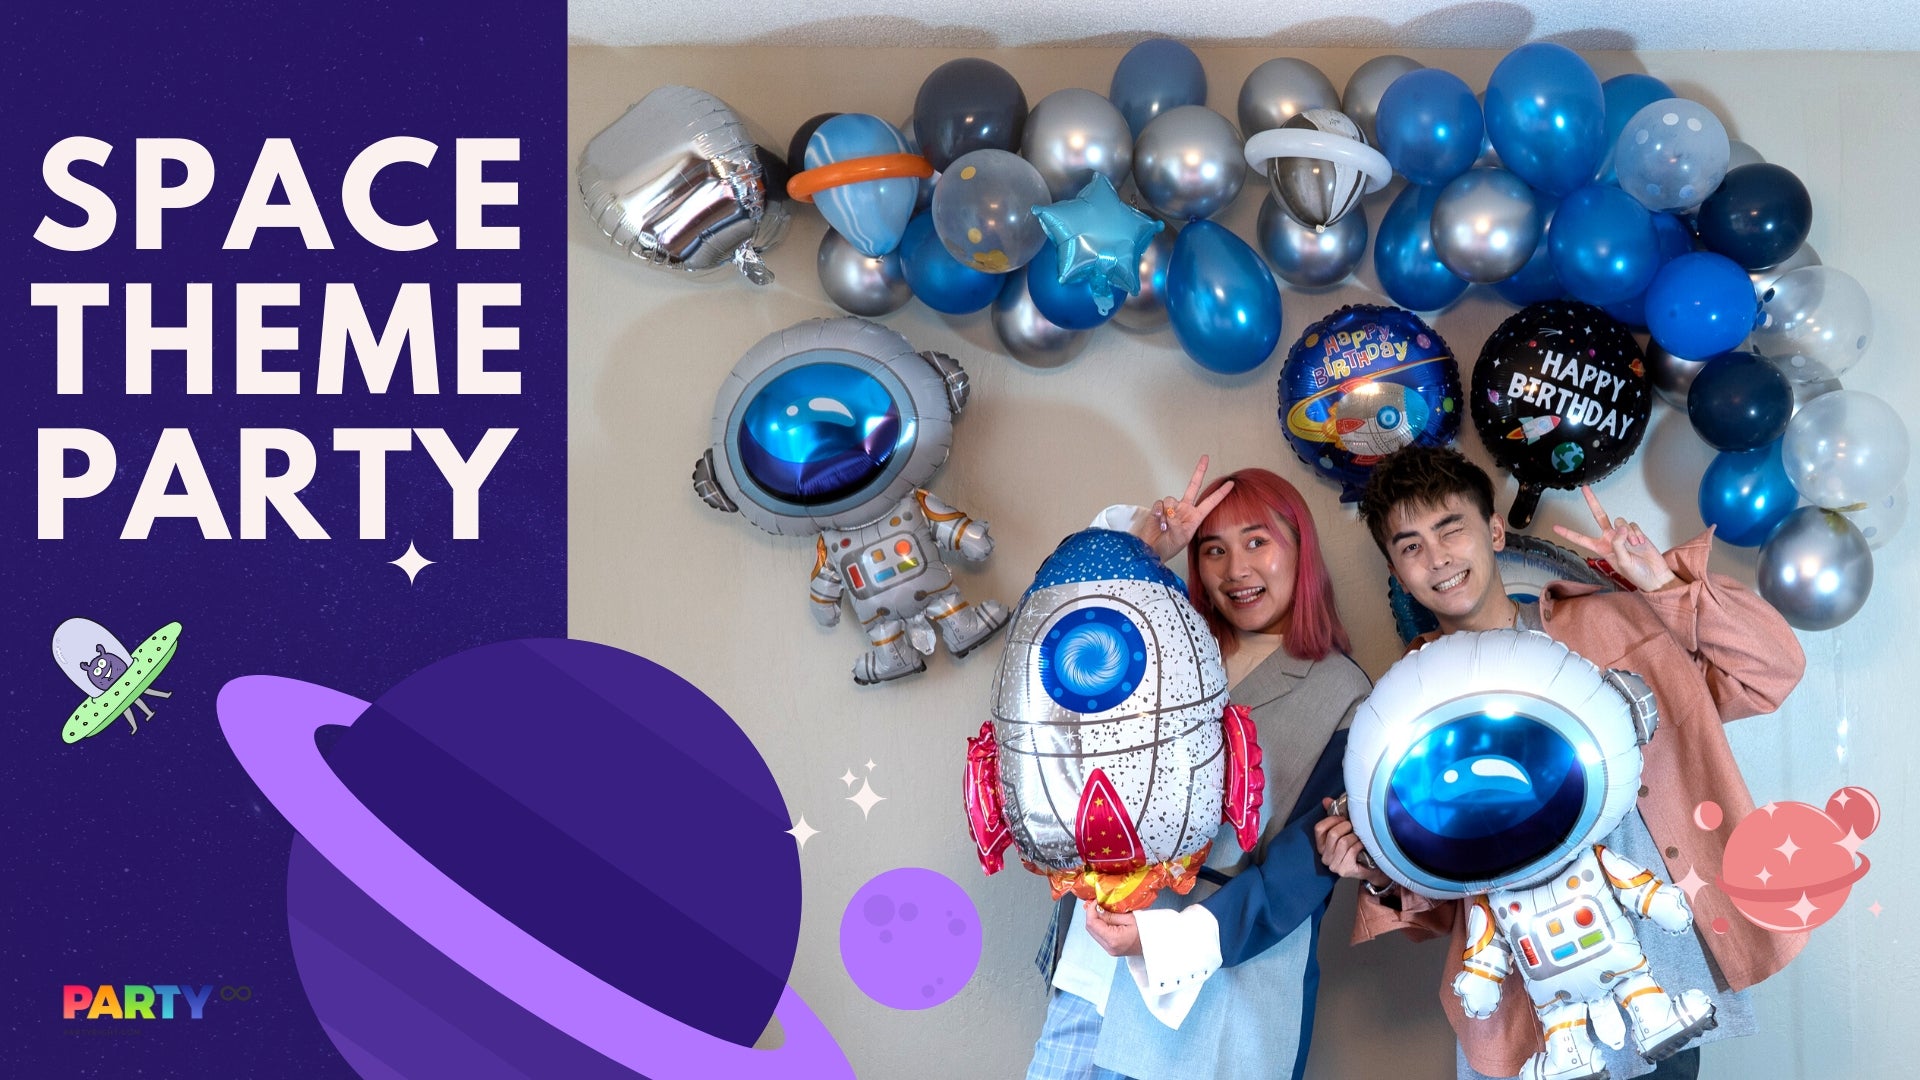 How to throw a unique space themed birthday party | Great inspiring blog